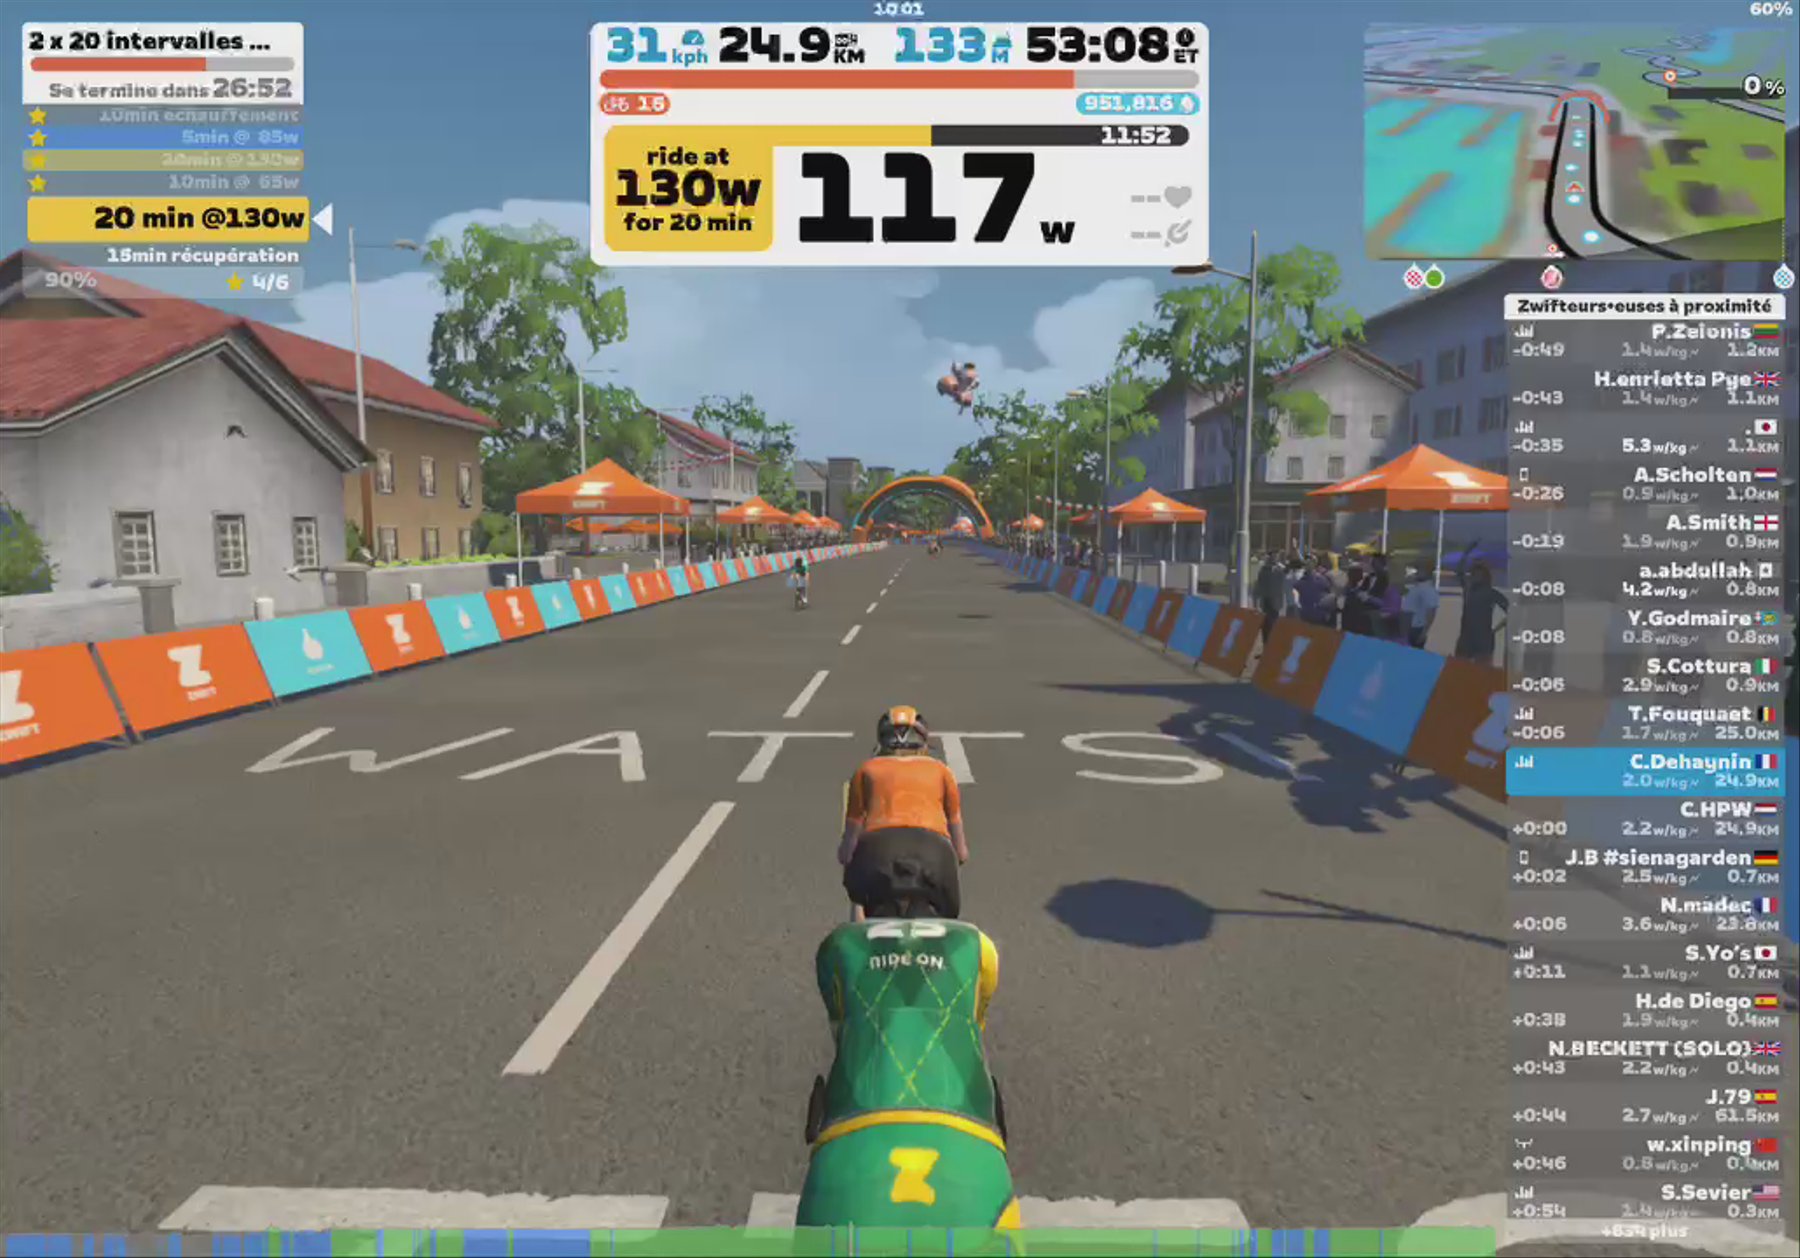 Zwift - 2x20 FTP Intervals in France